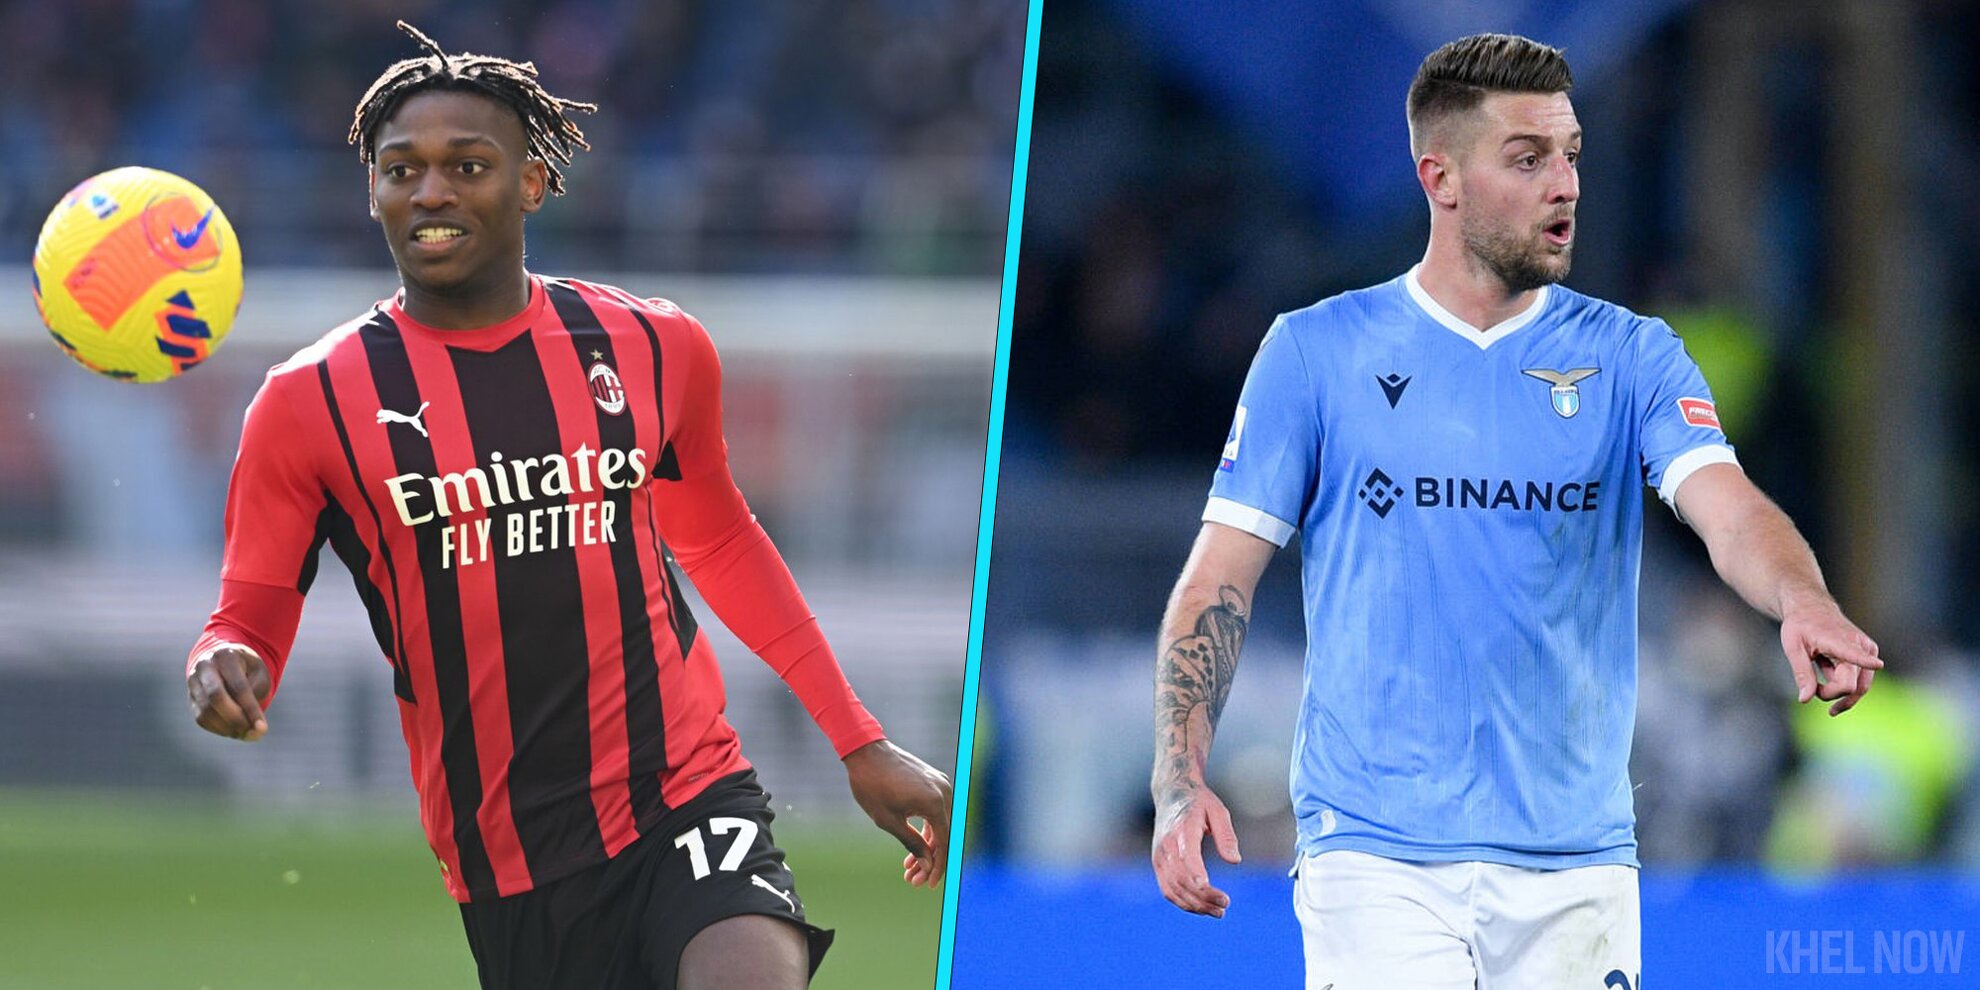 Top five players who could leave Serie A in summer 2022